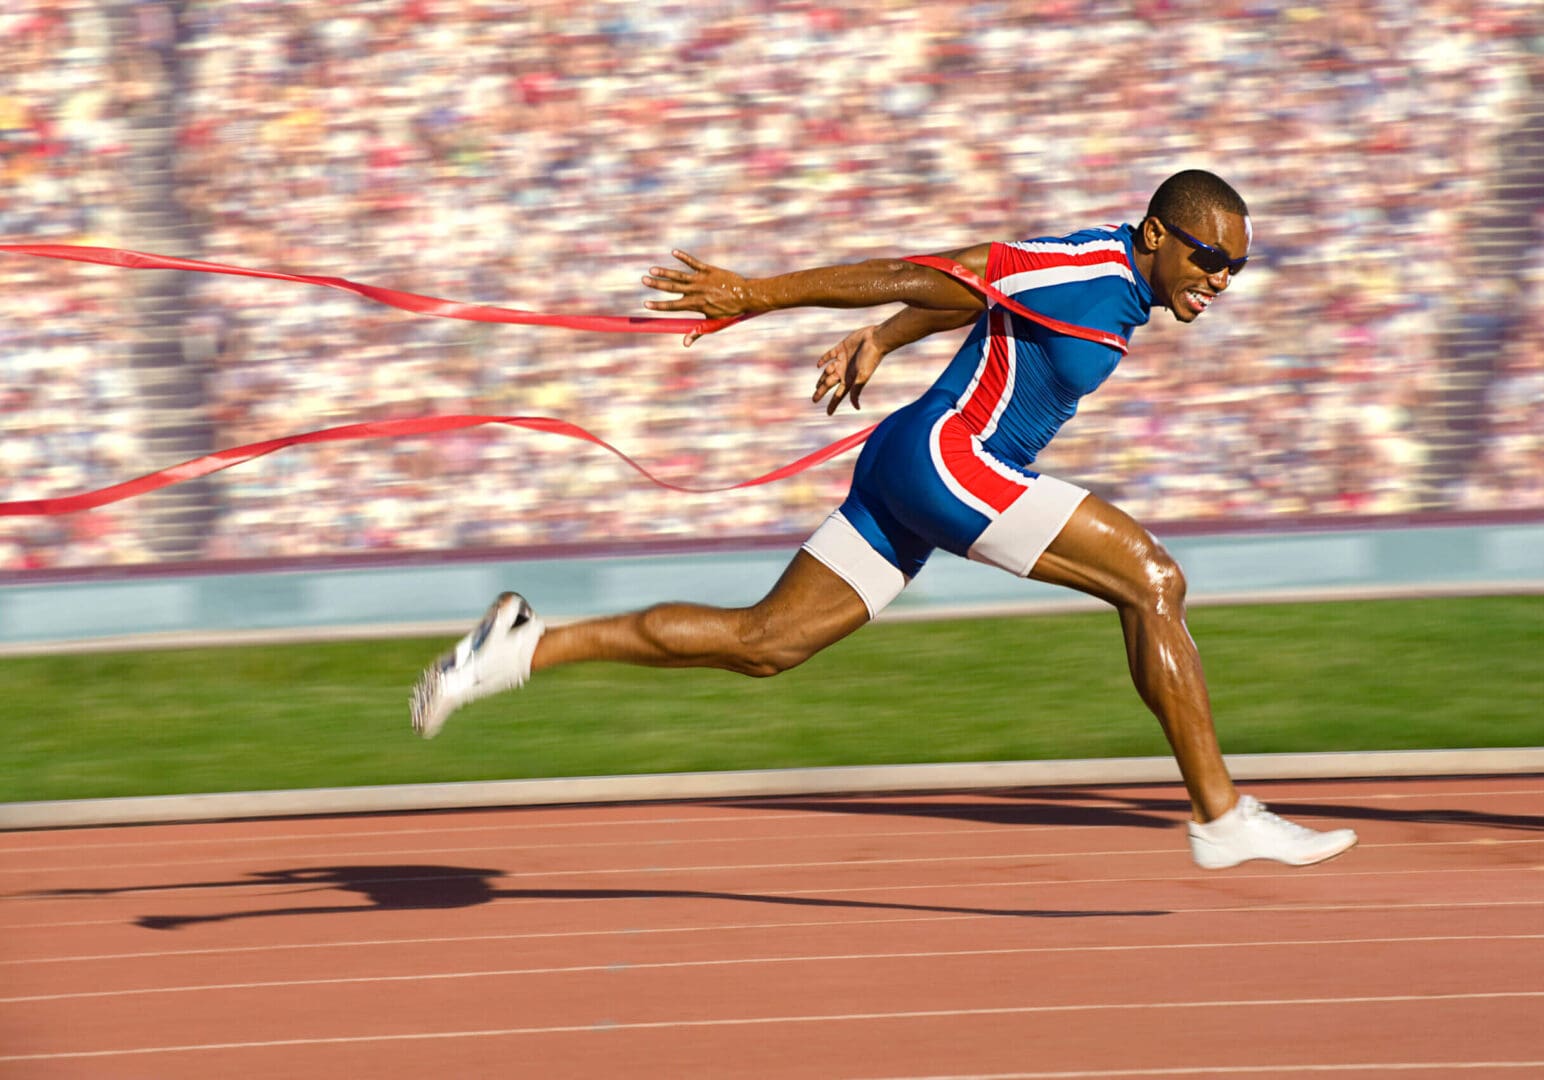 A man running on the track with a red ribbon.